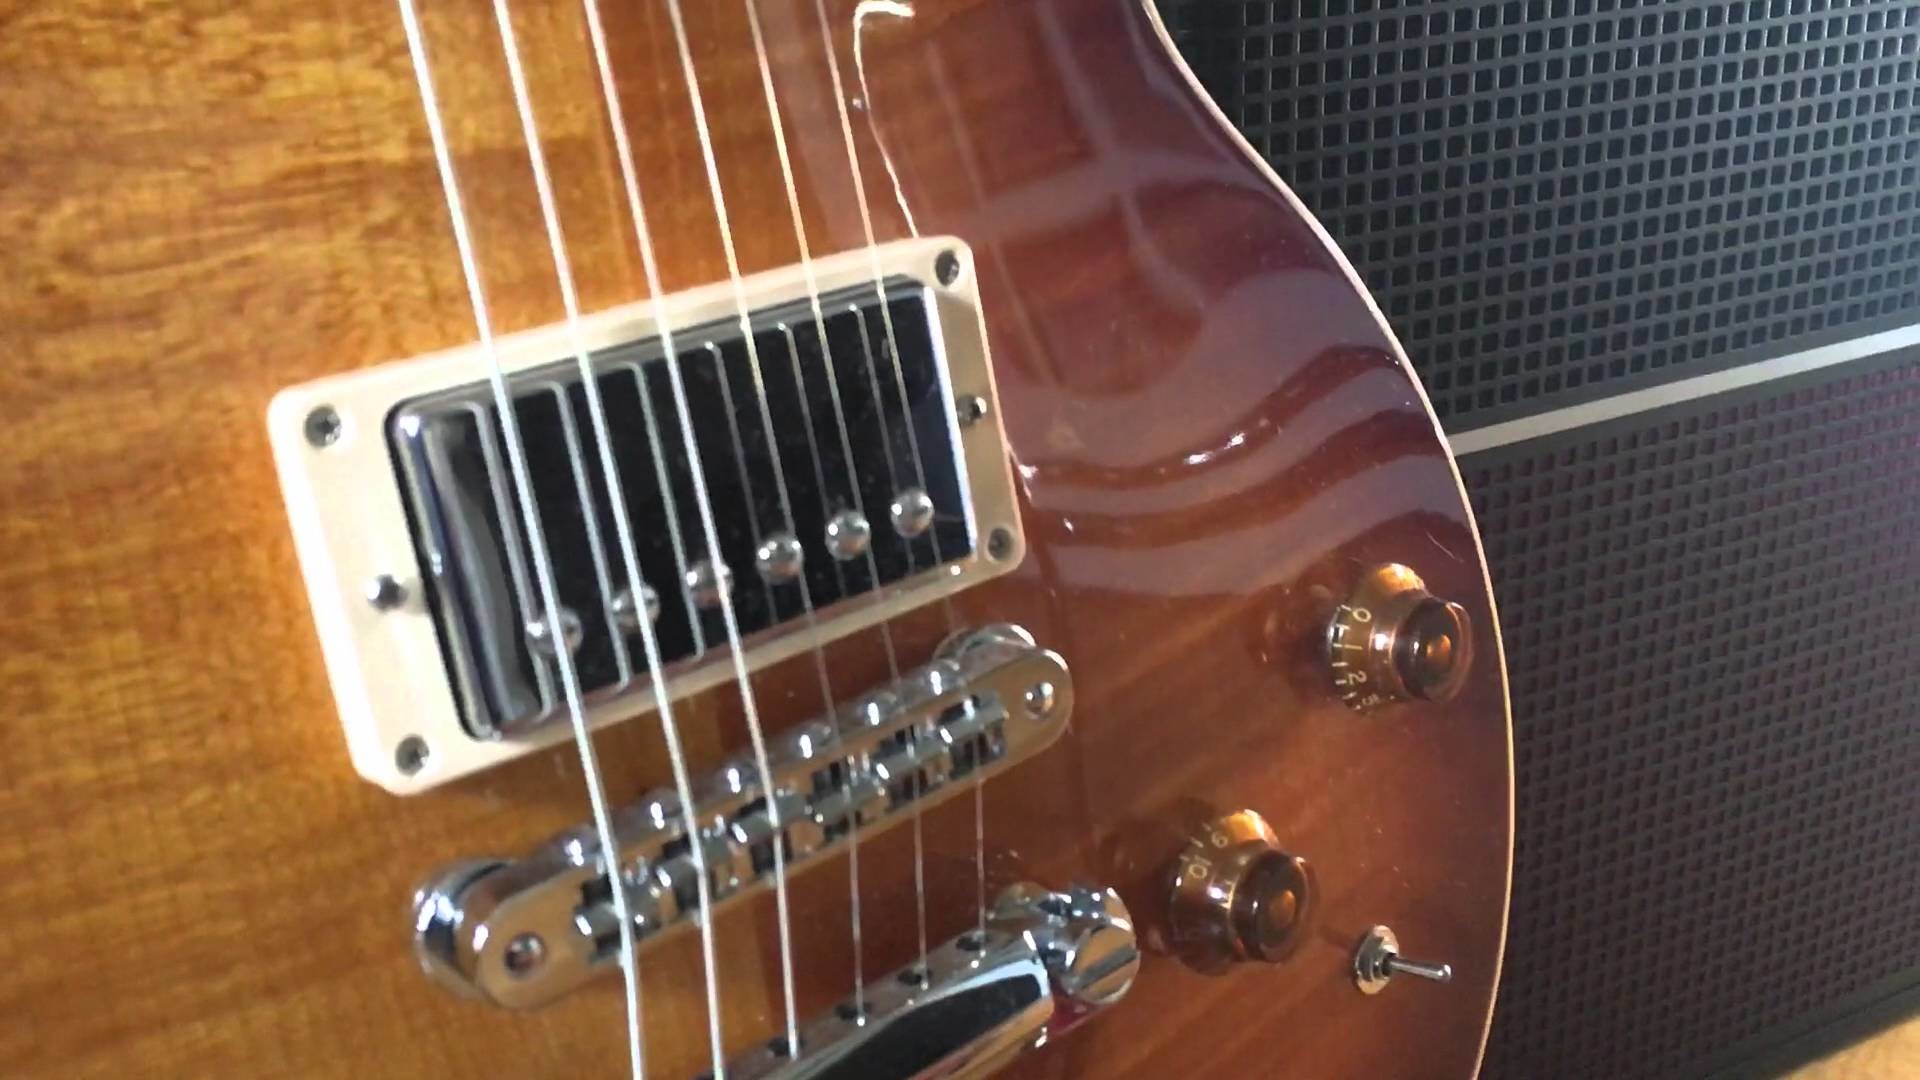 KaL MichaeL talks about his Gibson Les Paul Standard 2014 120th Anniversary